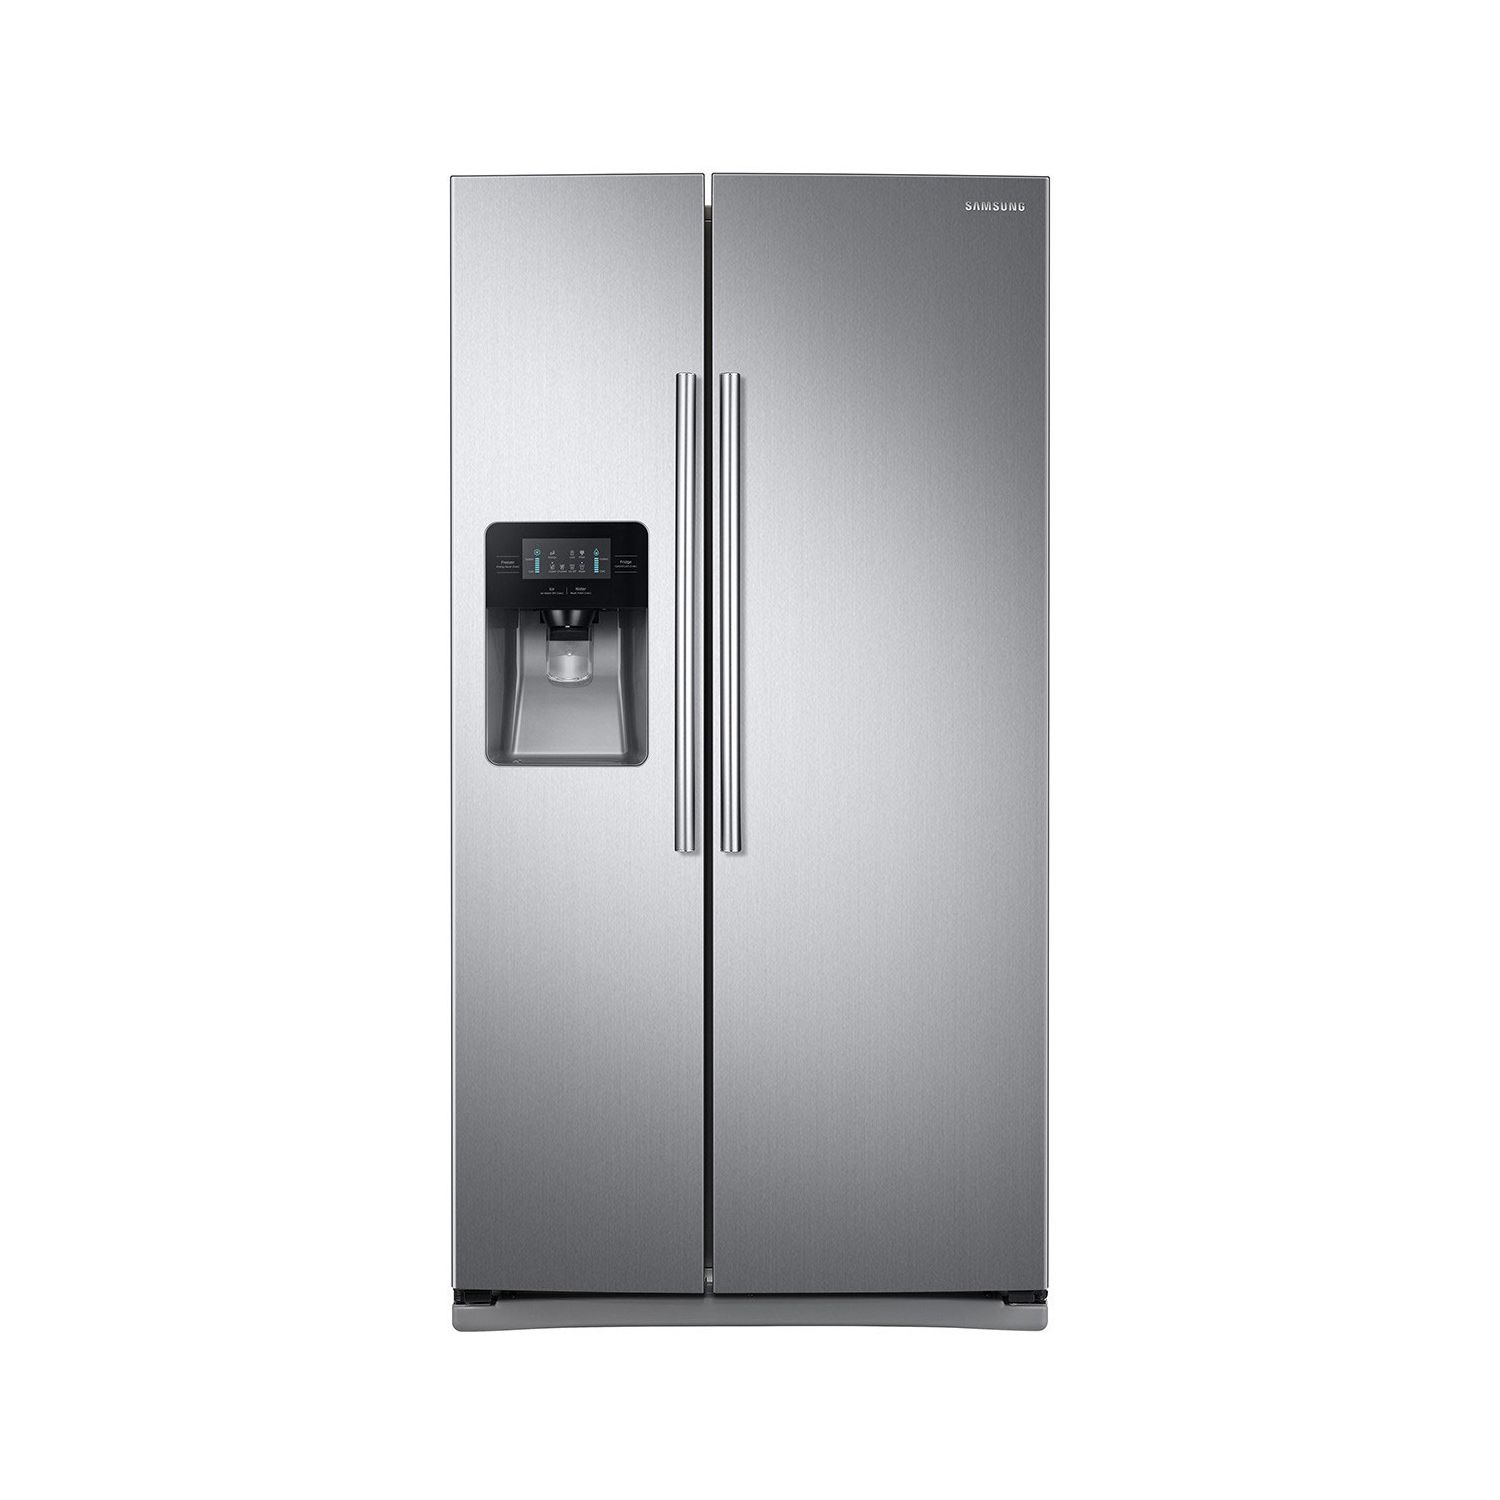 SAMSUNG RS25J500DSR 24.5 Cu. Ft. Side-by-Side Refrigerator with External Water and Ice Dispenser